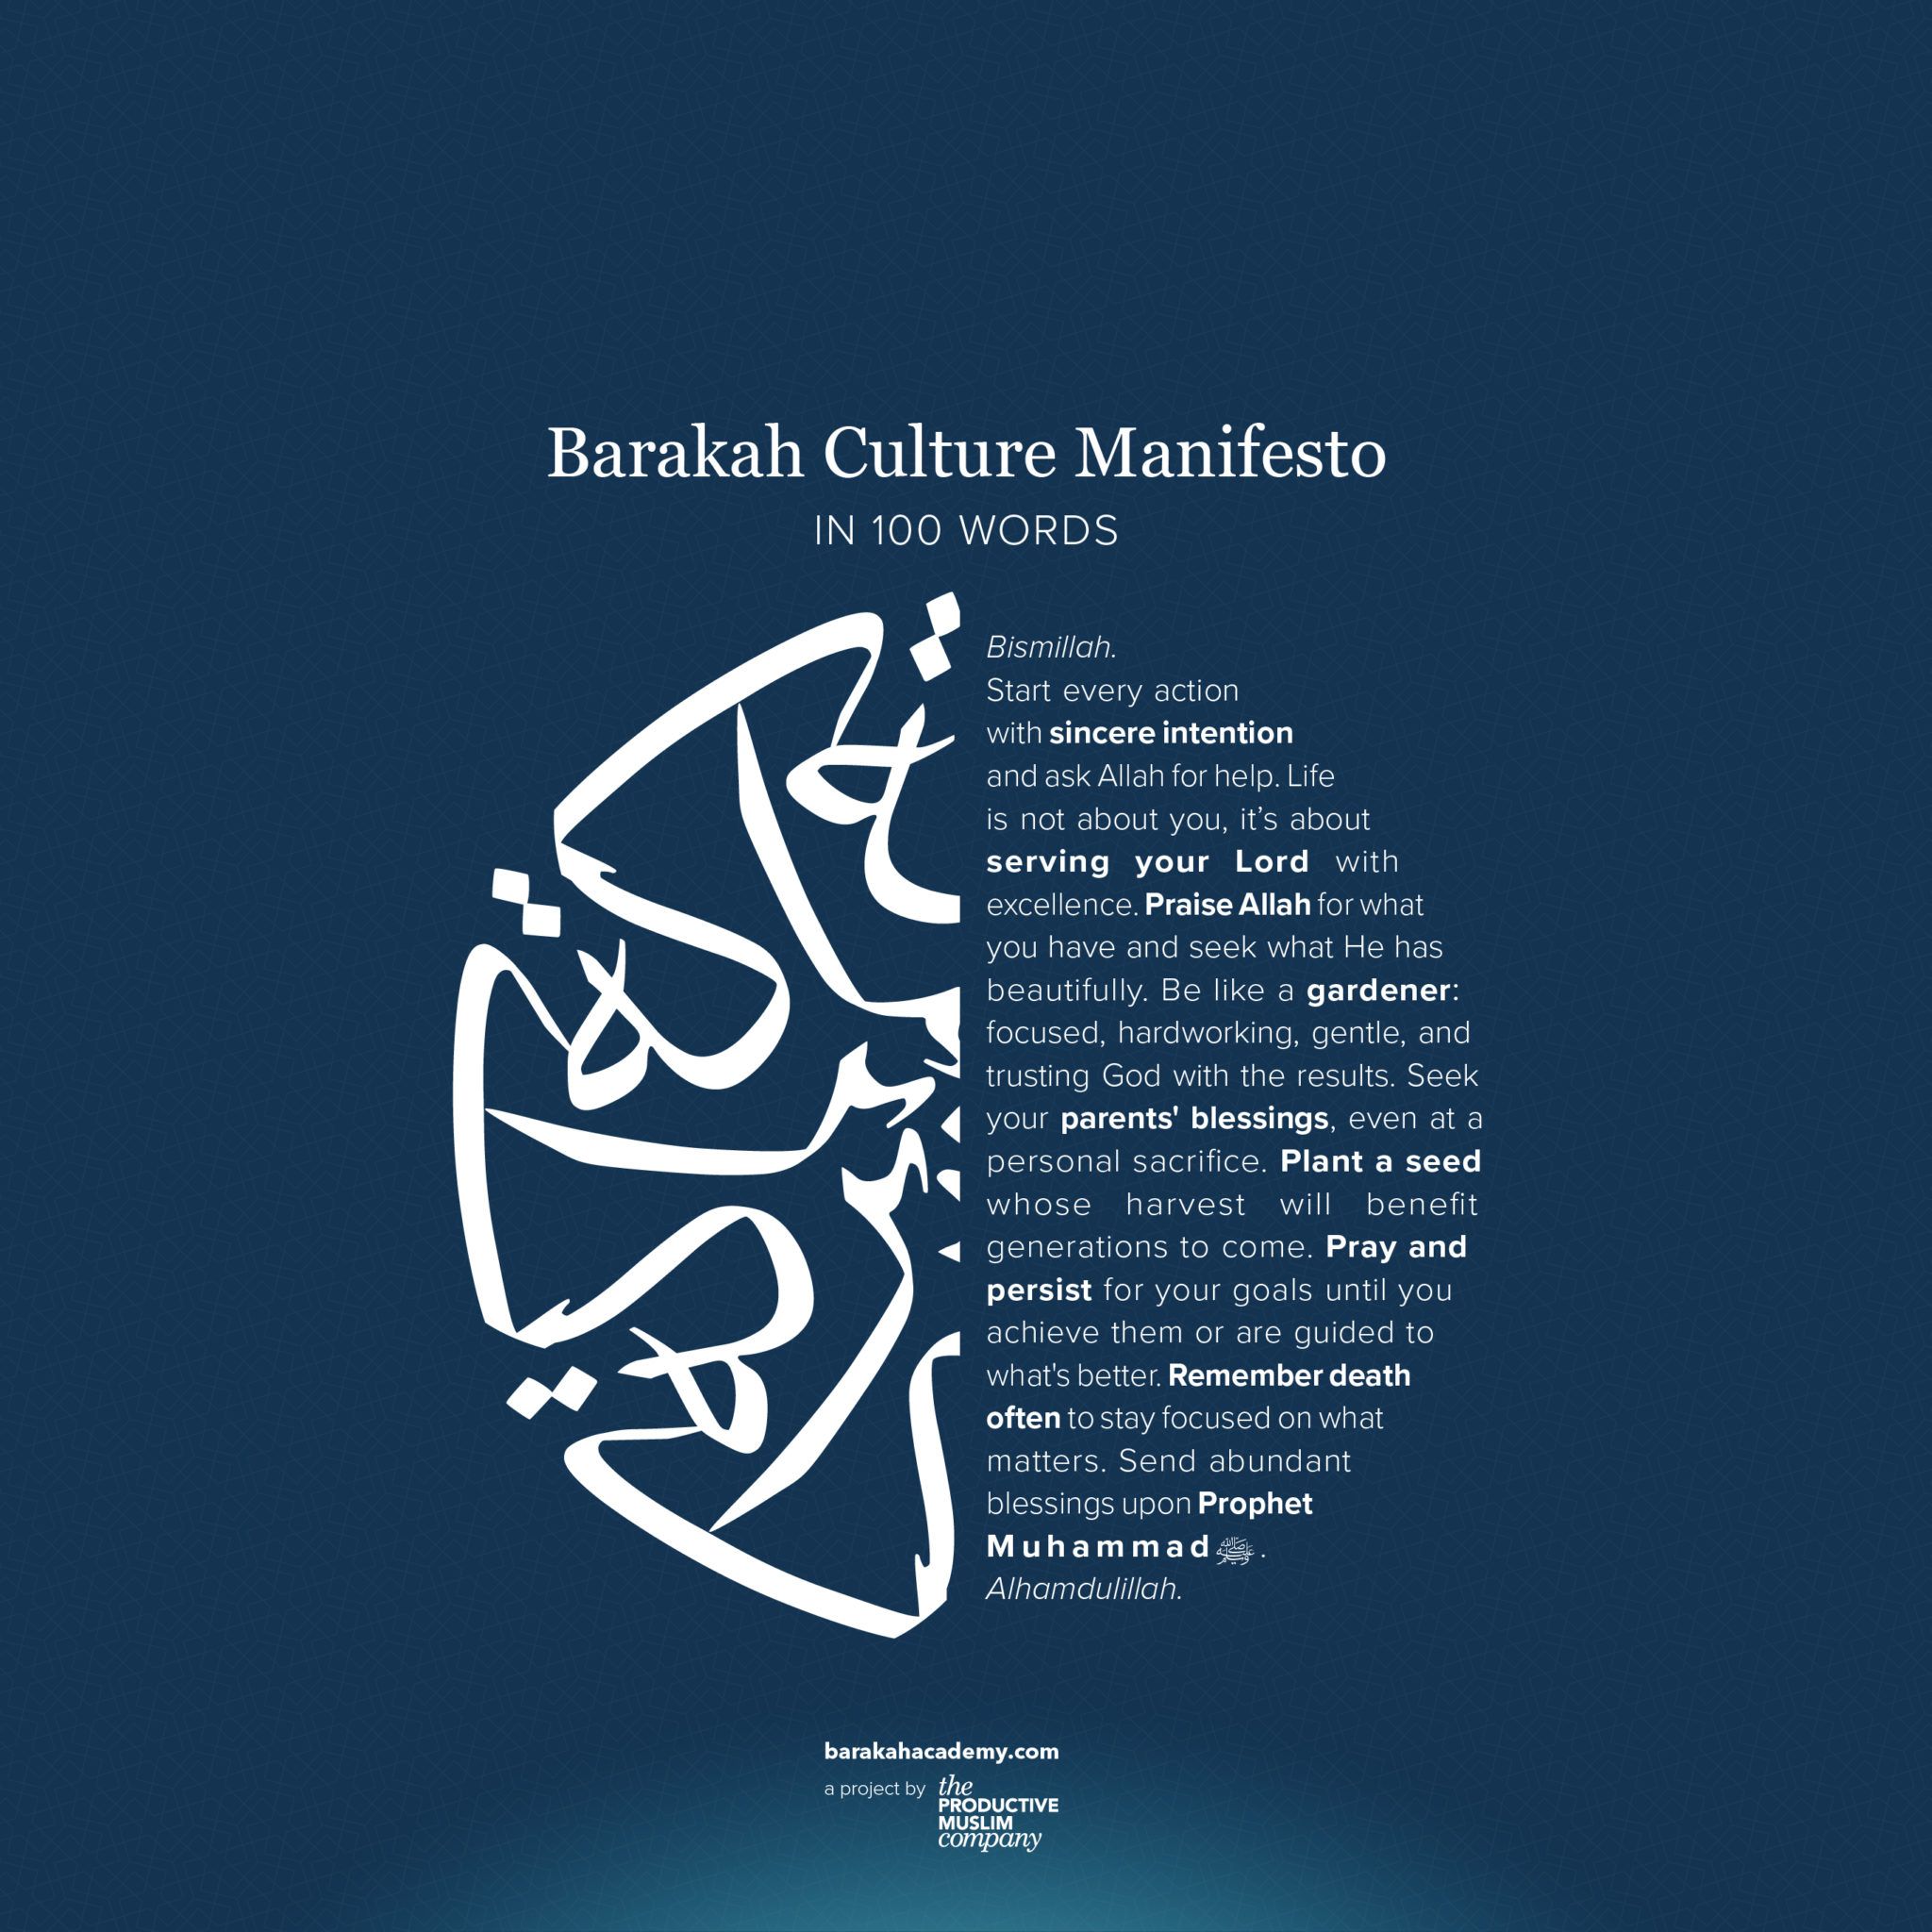 Download Now Barakah Culture Manifesto Wallpaper for Your